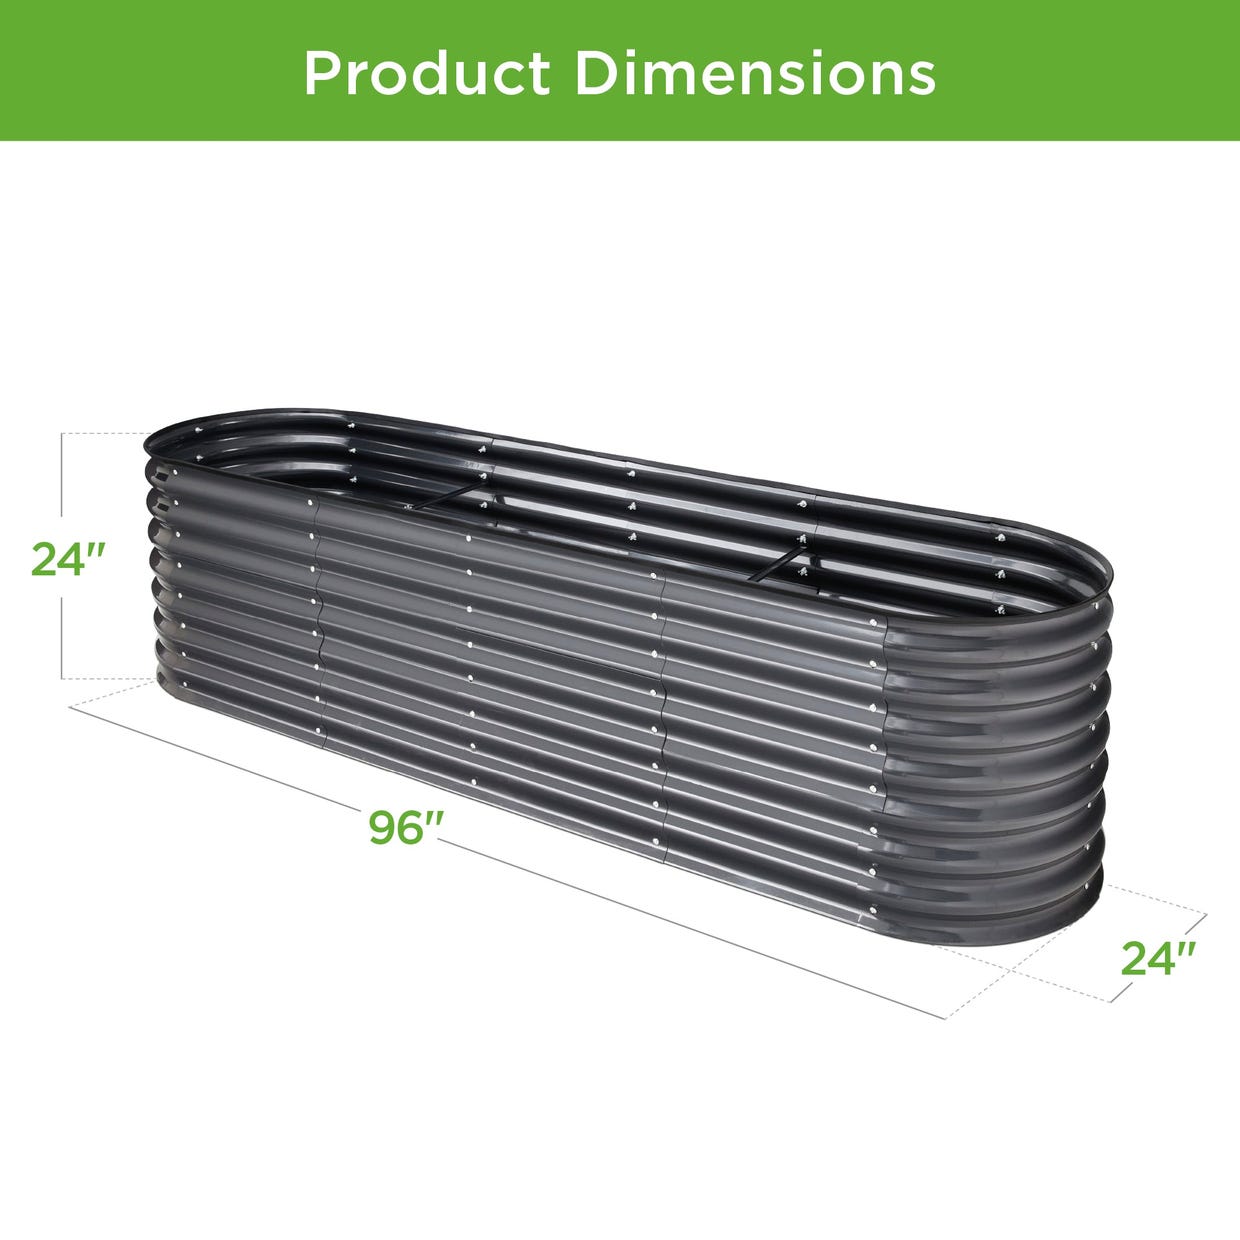 An oval garden bed measuring 96 inches by 24 inches, made of ribbed metal with a height of 24 inches.